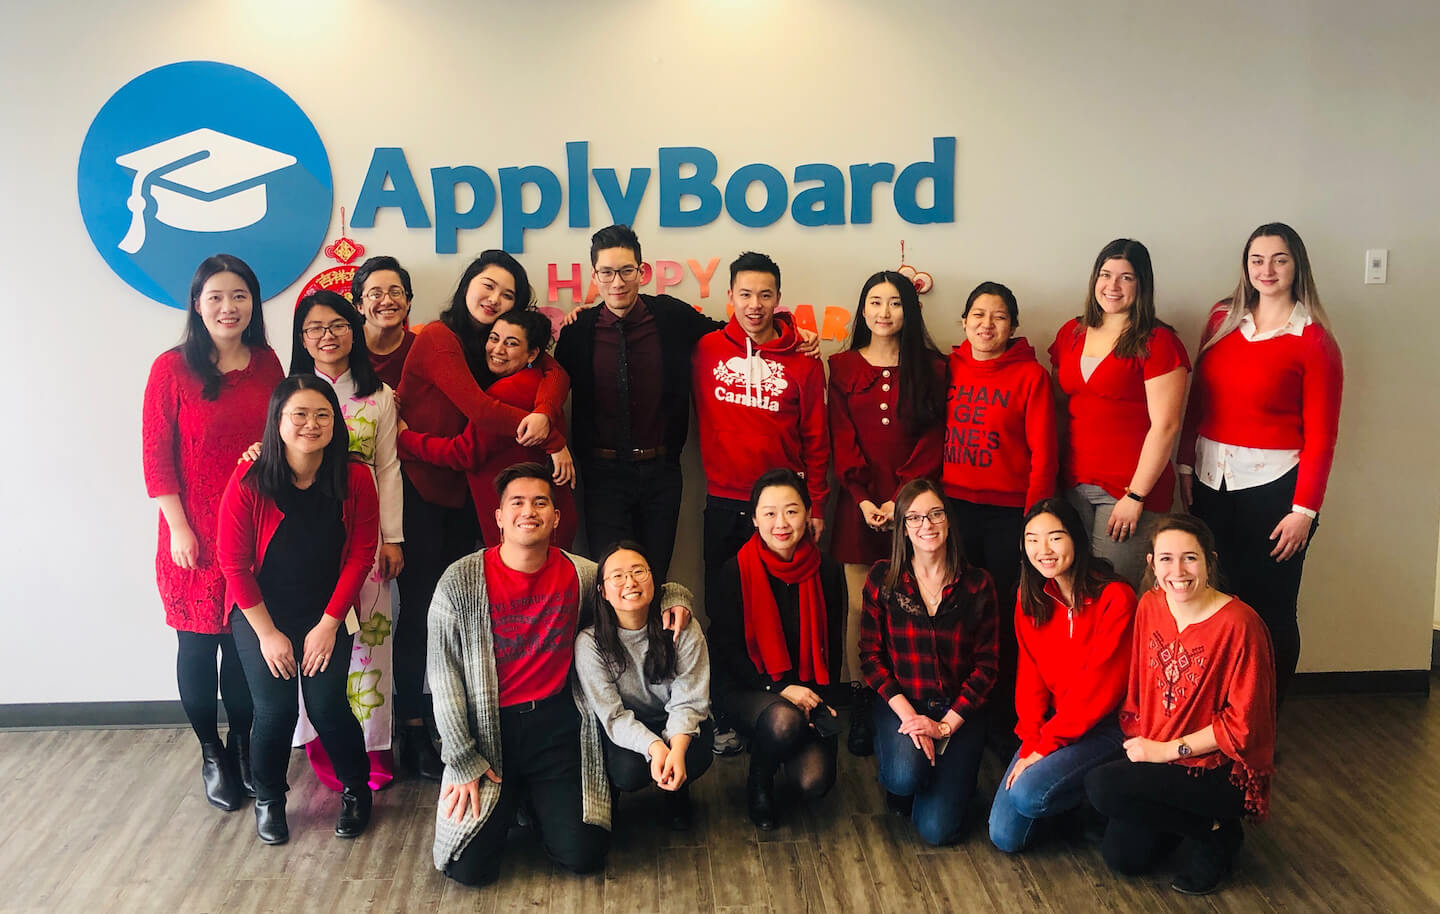 ApplyBoard staff wearing red at the office Lunar New Year celebration